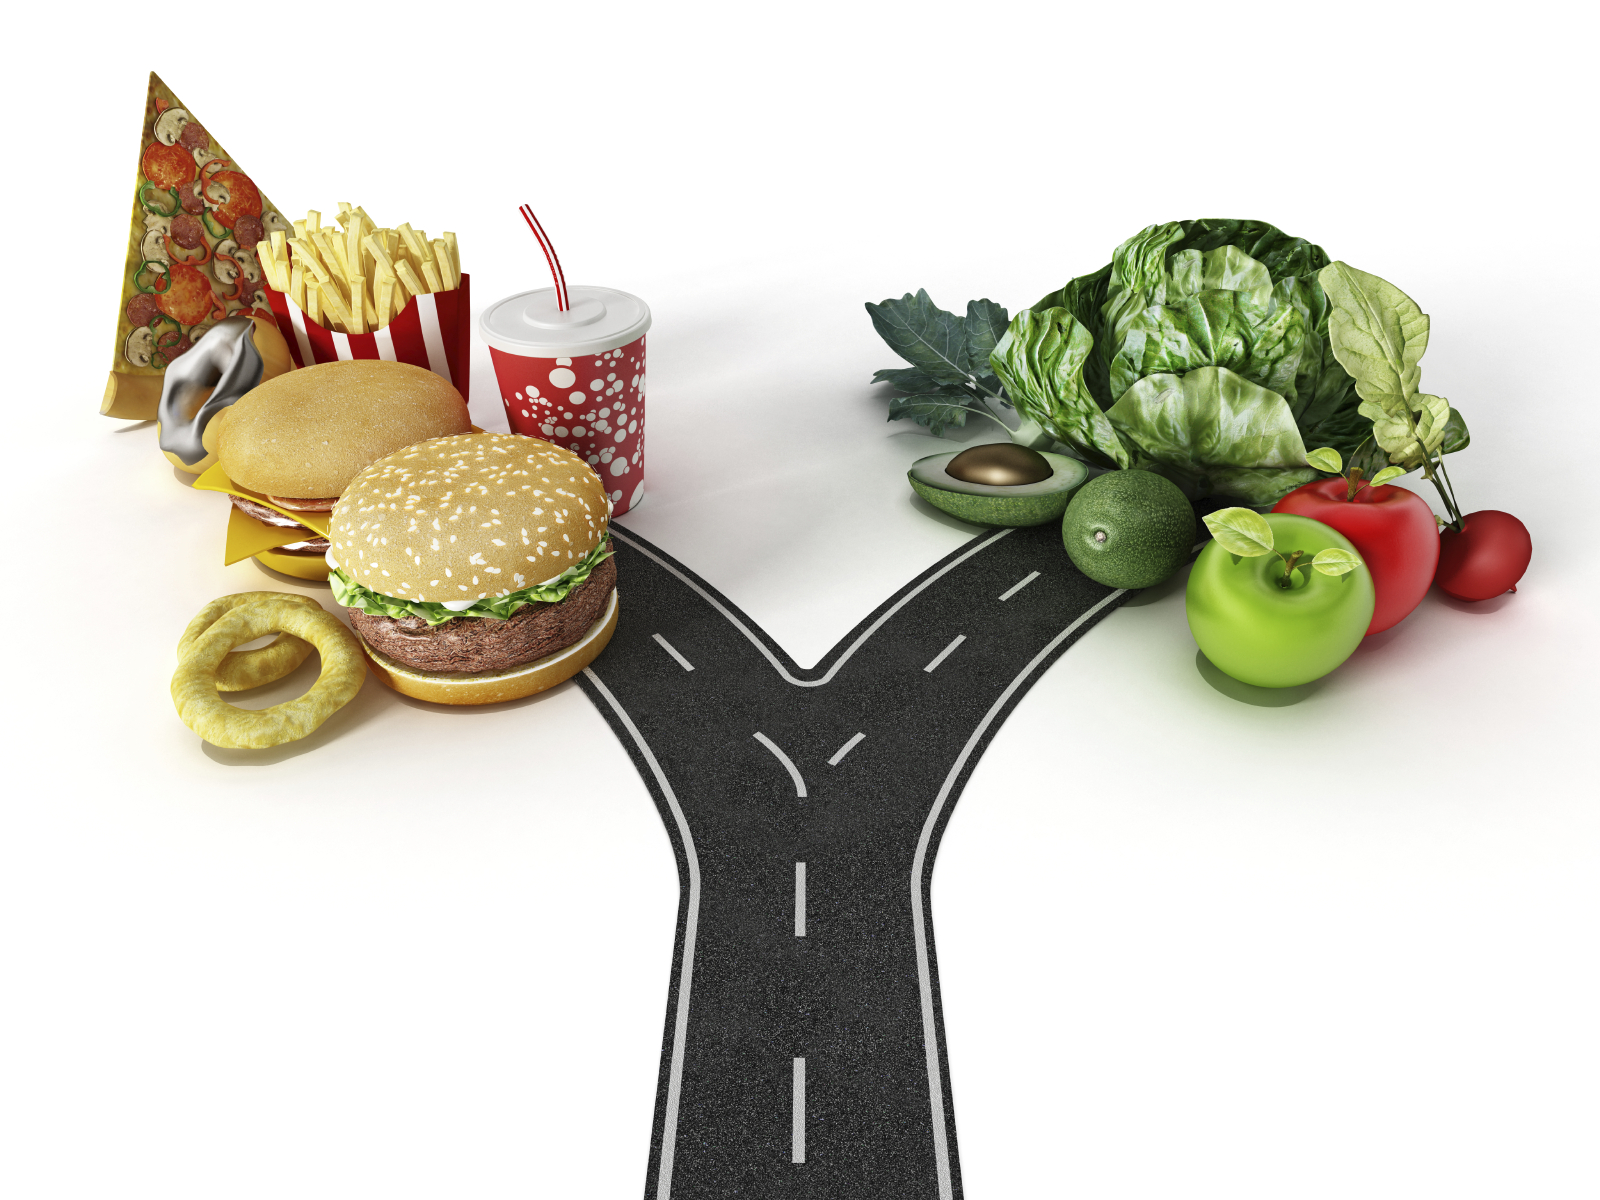 Dissociation between real-world food choices and health value judgements in obesity